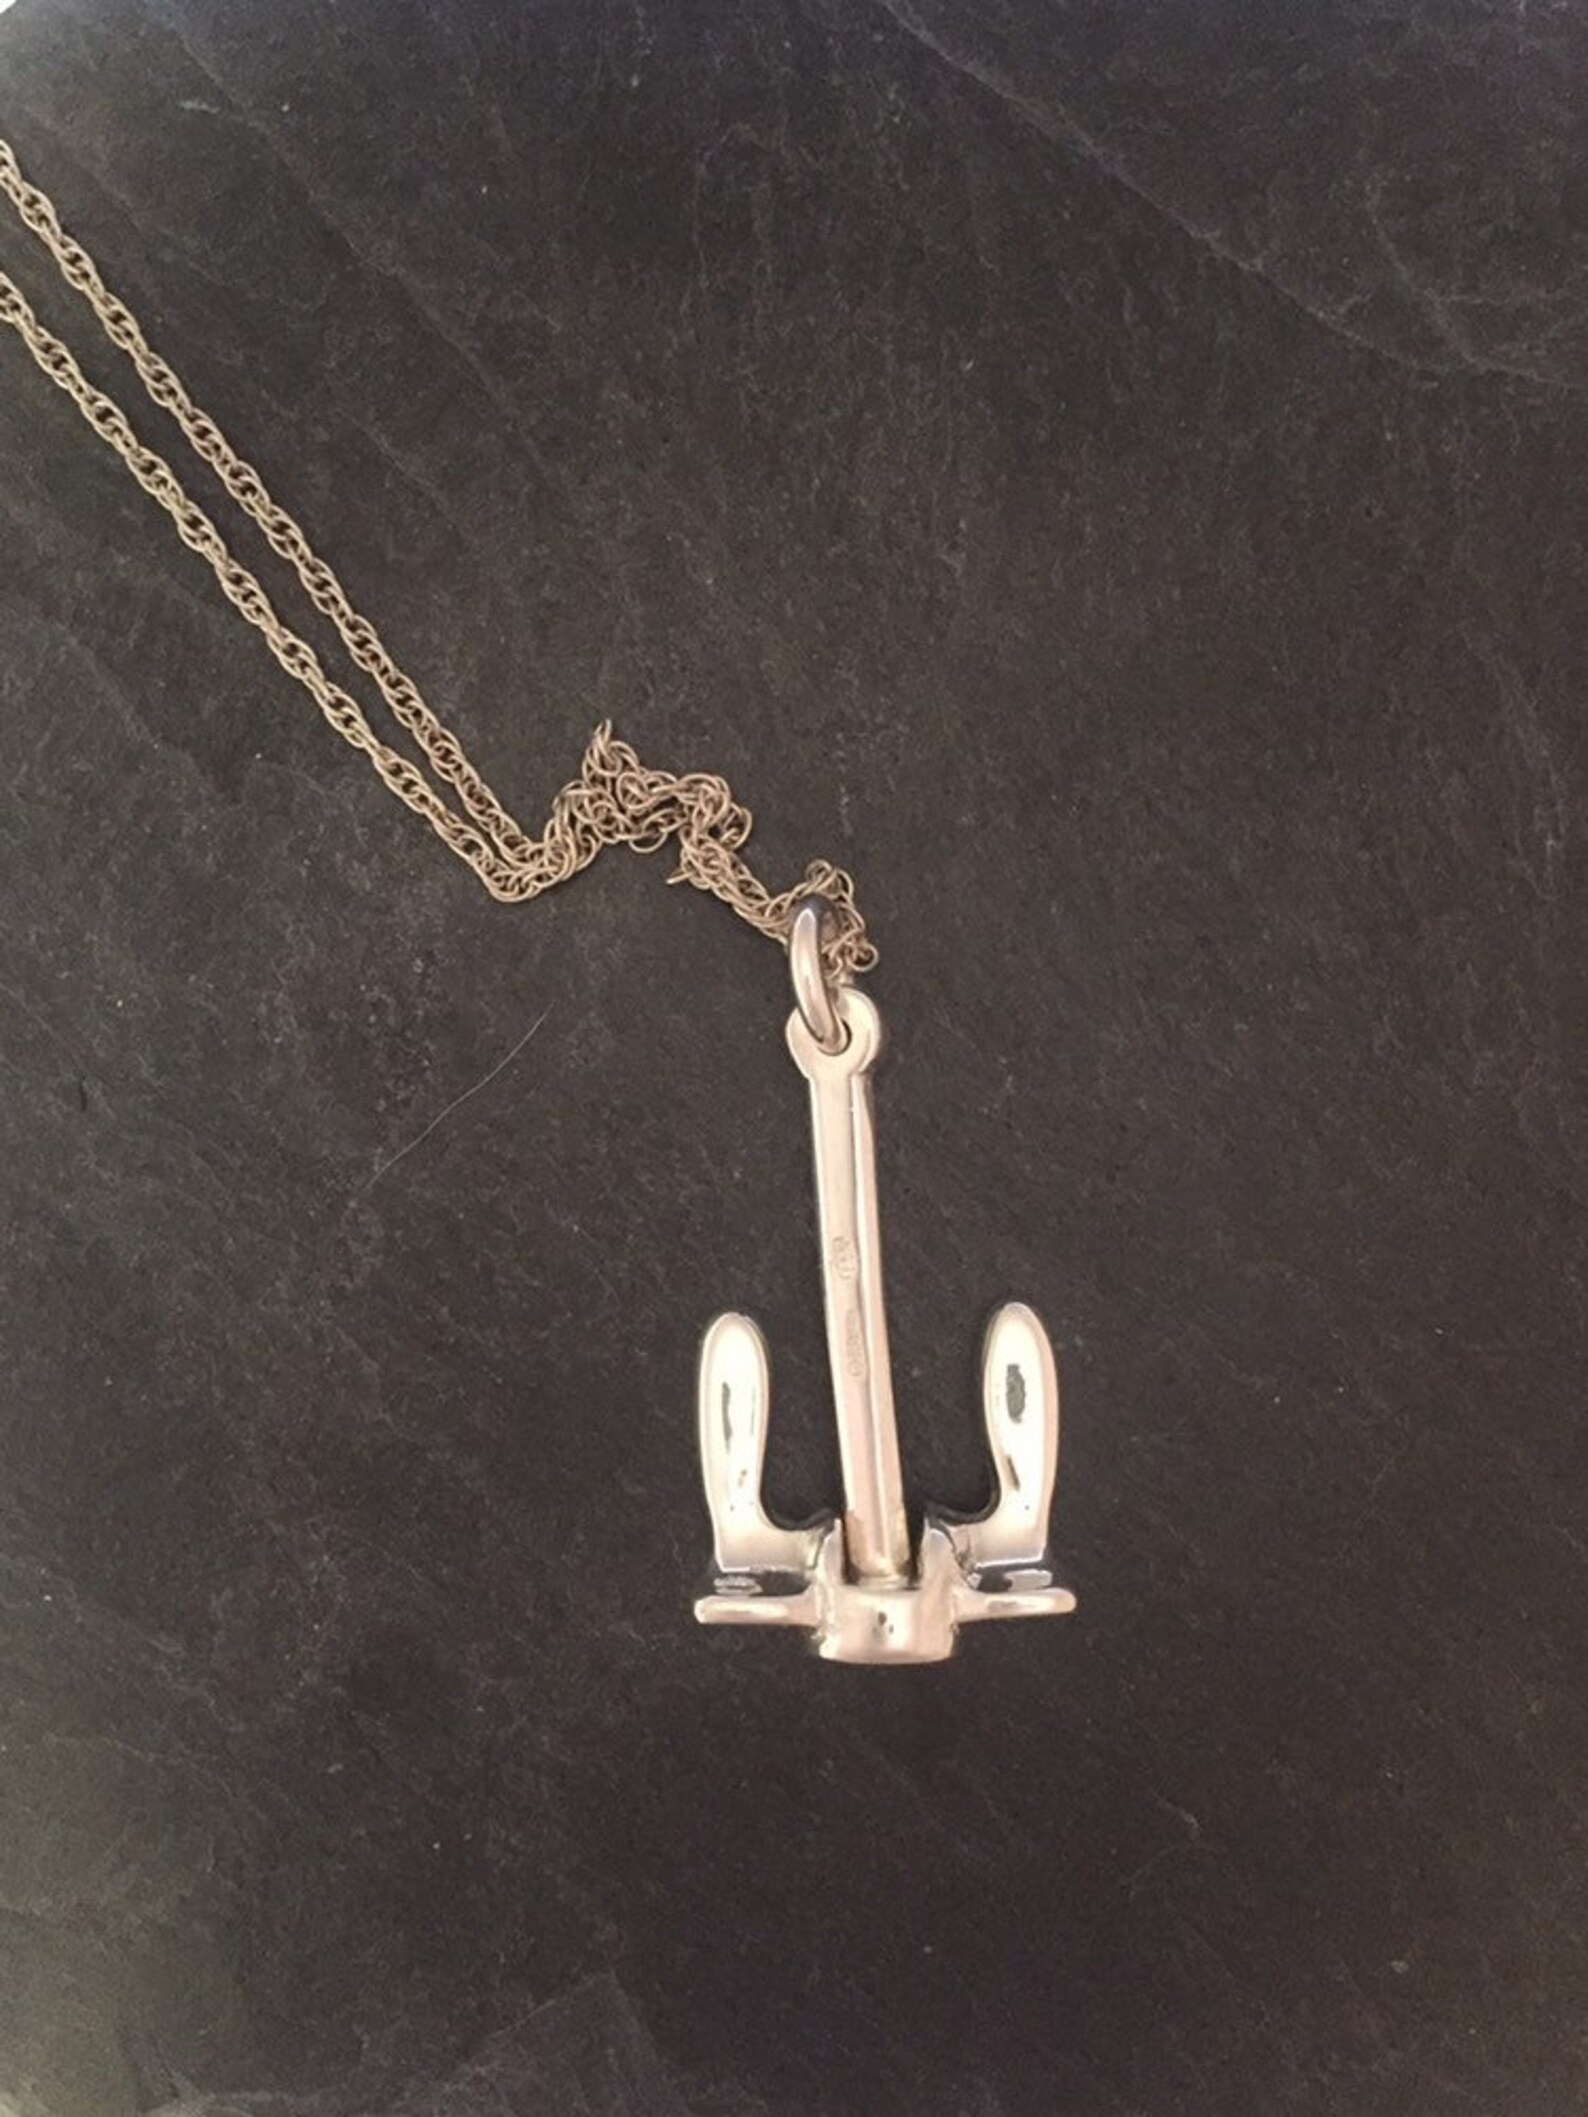 Navy Stockless Anchor in Sterling Silver Necklace Pendant - Etsy